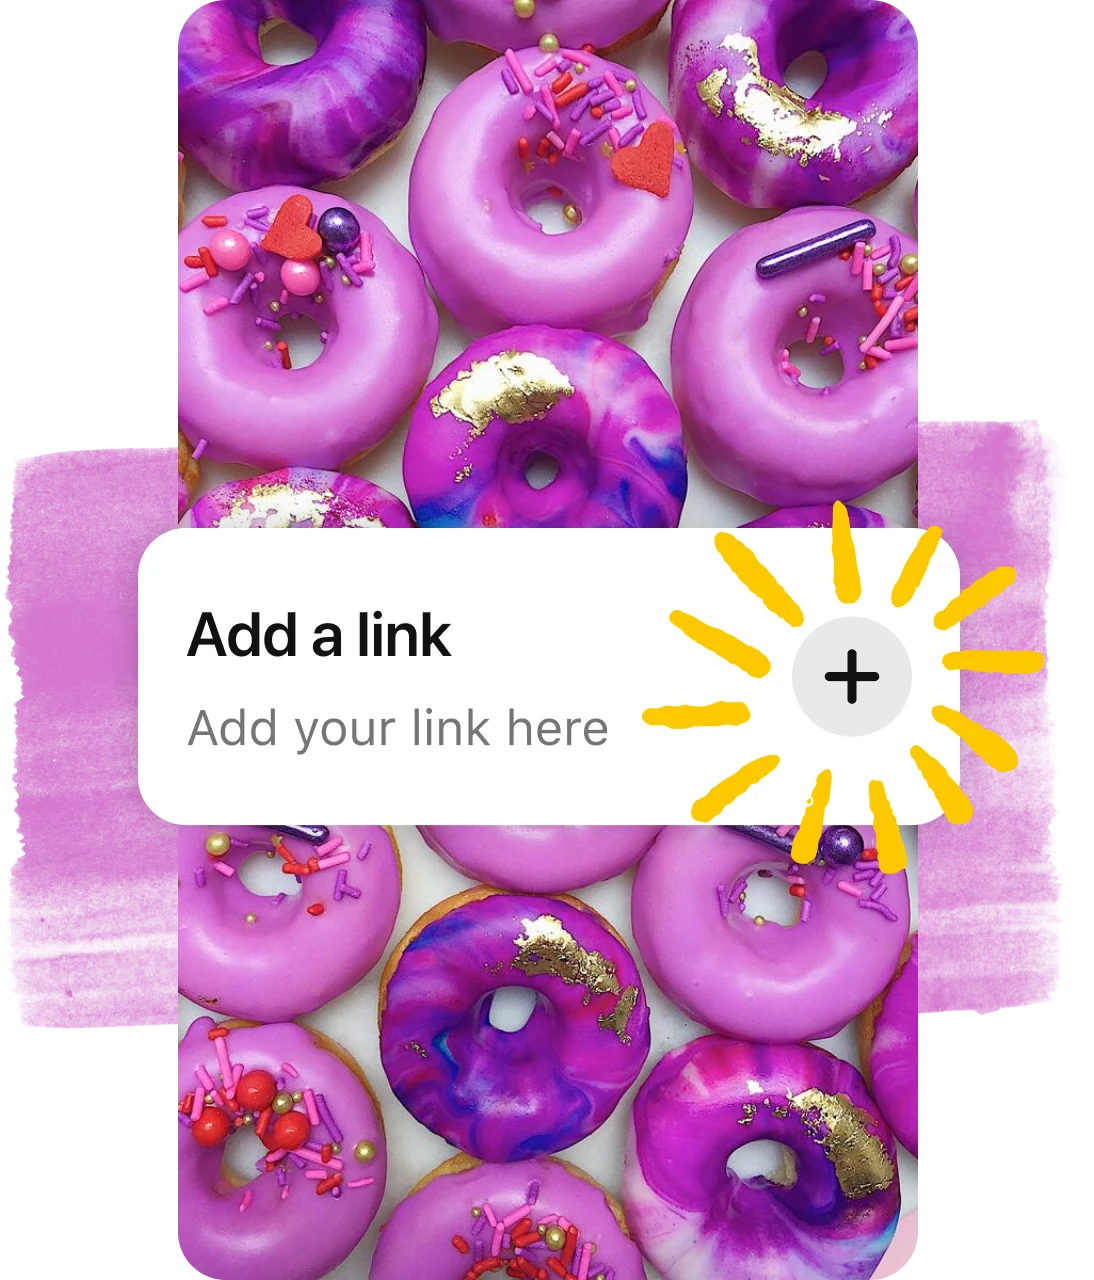 An ‘Add a link’ button overlaid on a Pin of purple doughnuts